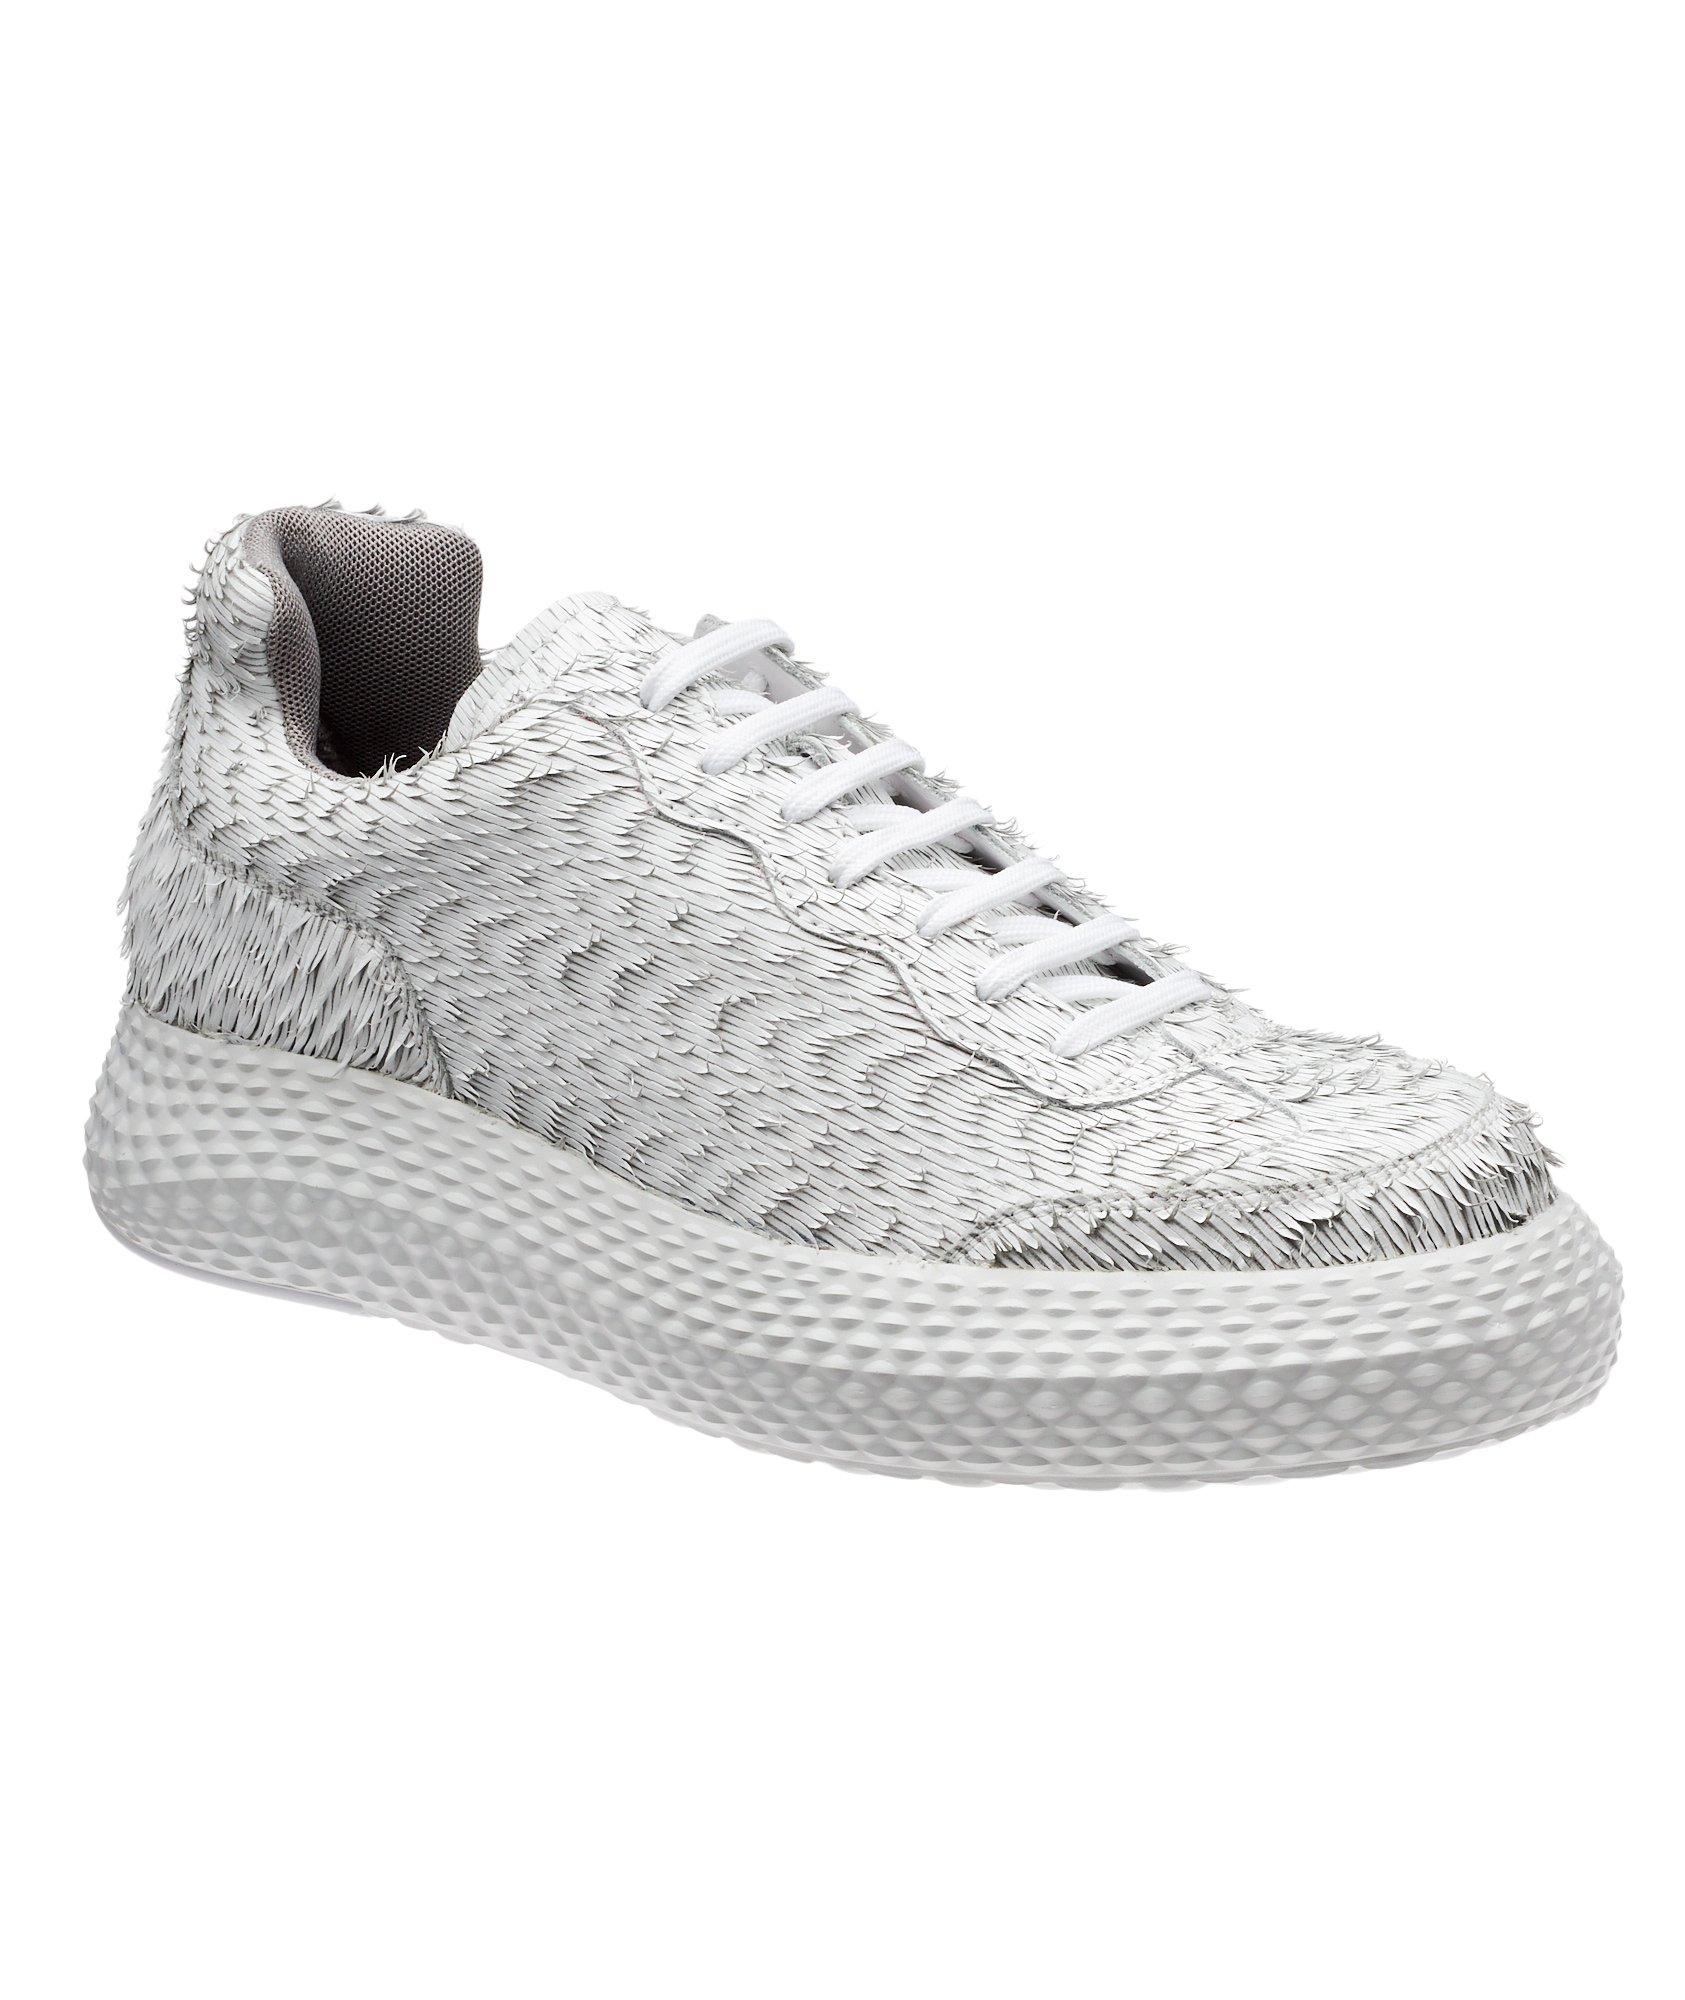 Textured Leather Sneakers image 0